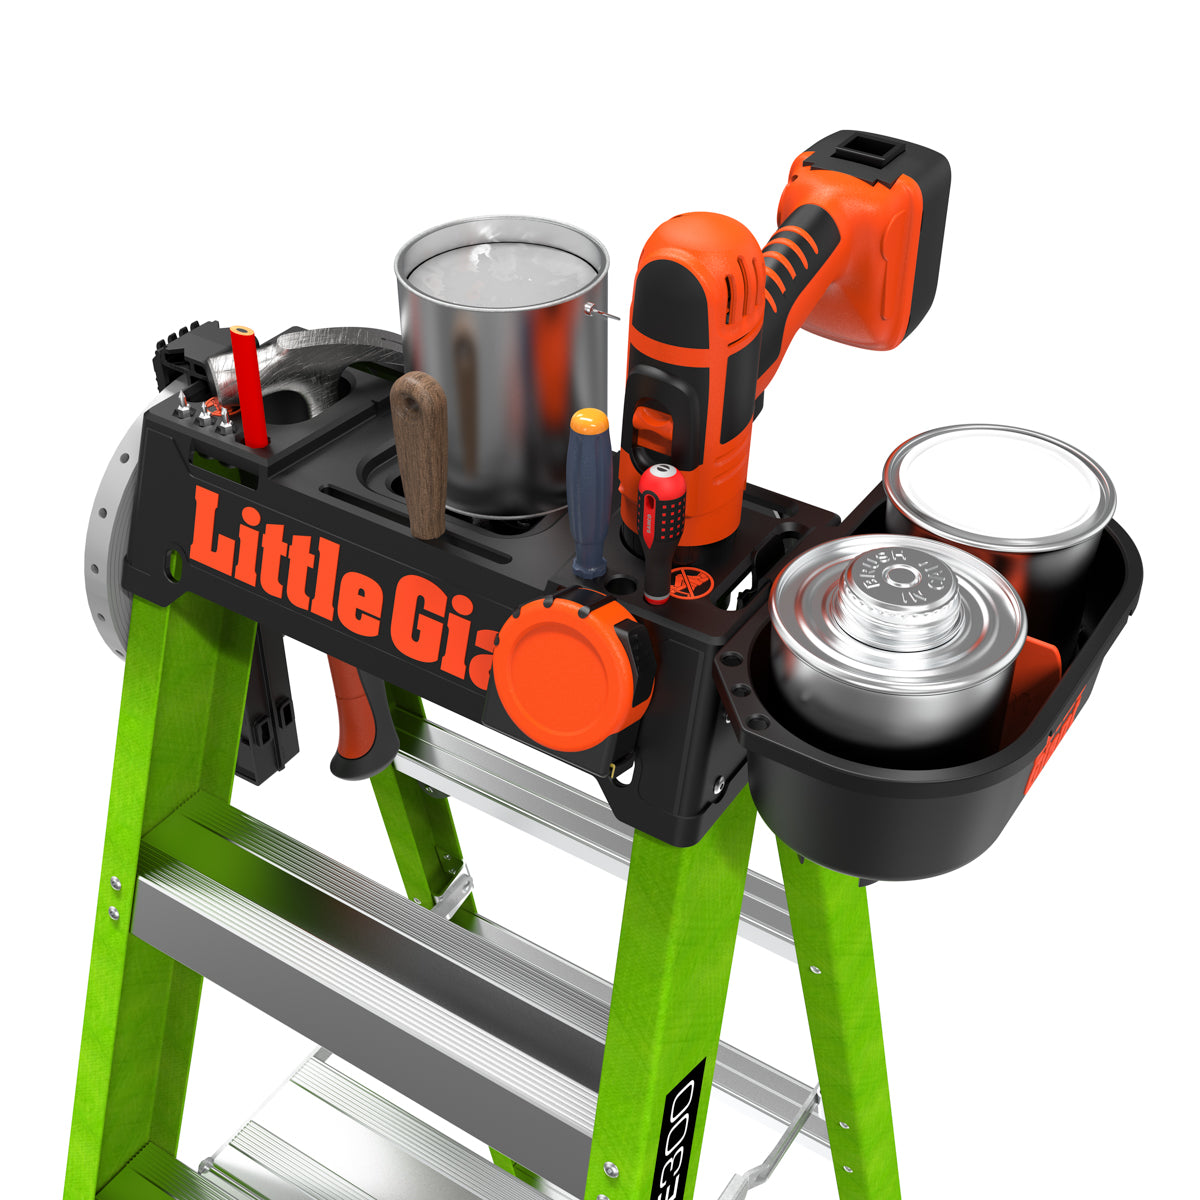 Little Giant A-Force300 Top Cap hero image with tools